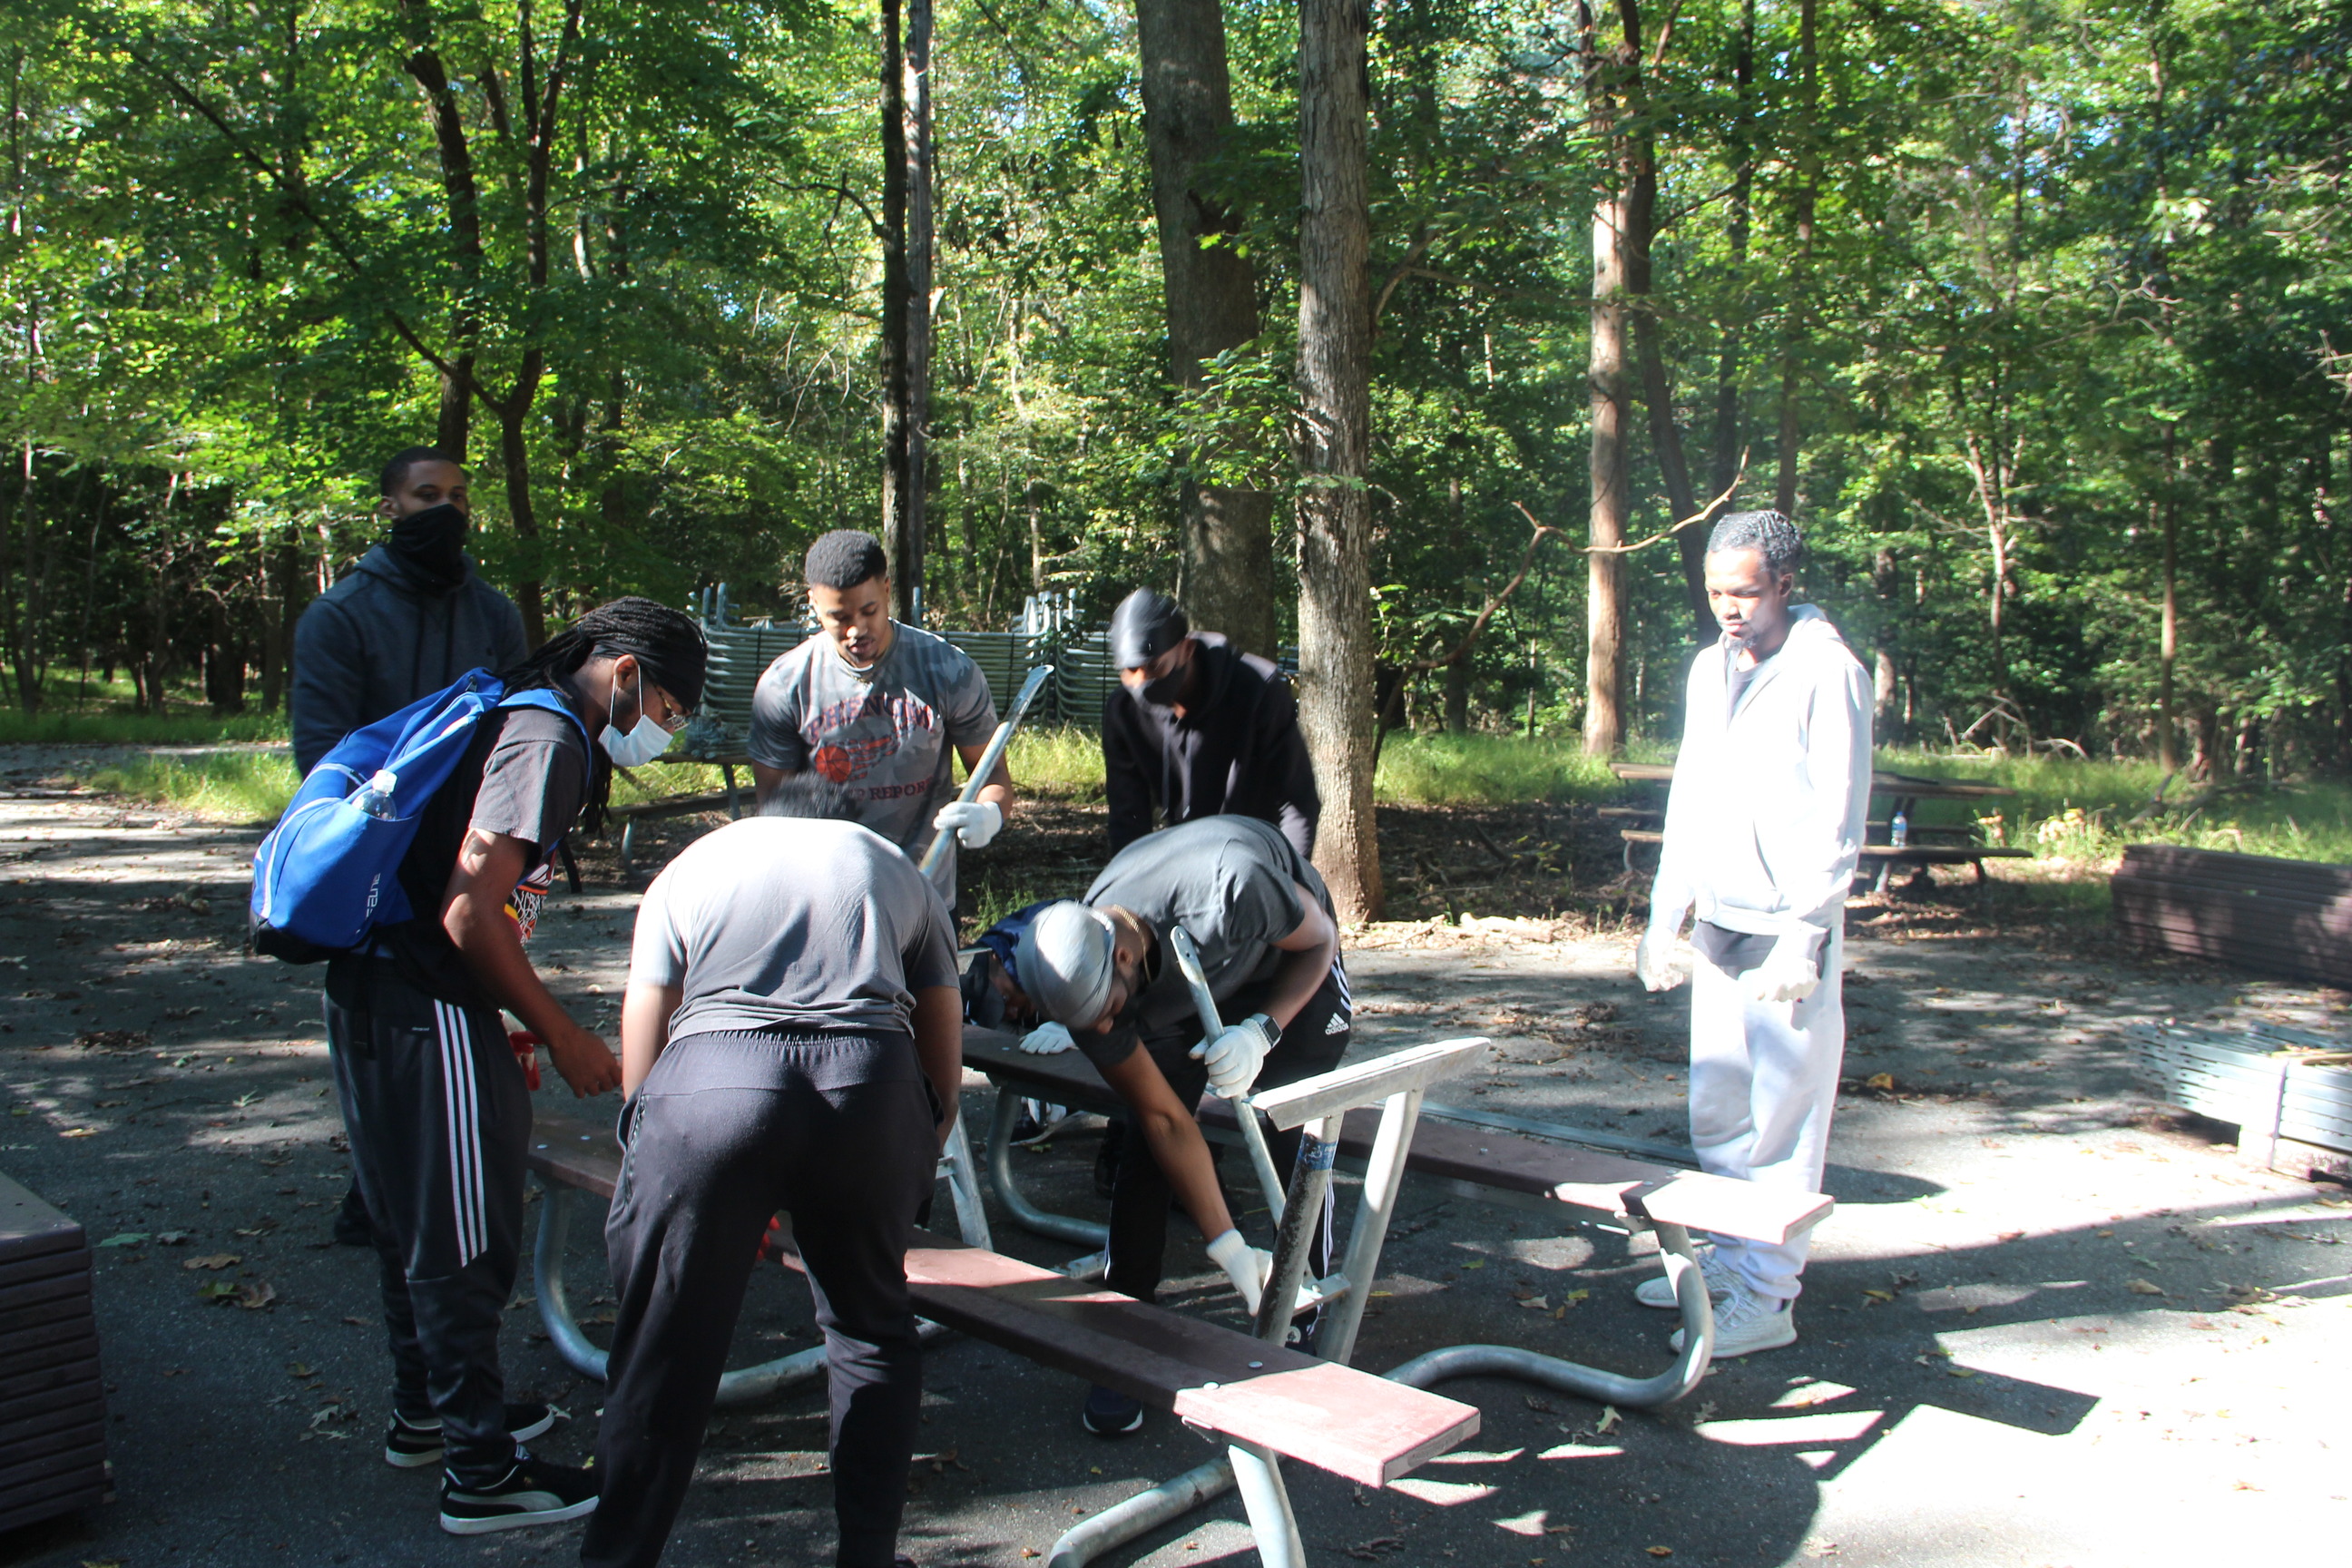 2021 National Public Lands Day  at Greenbelt Park MD with Howard University volunteers putting together picnic tables in the Greenbelt campground